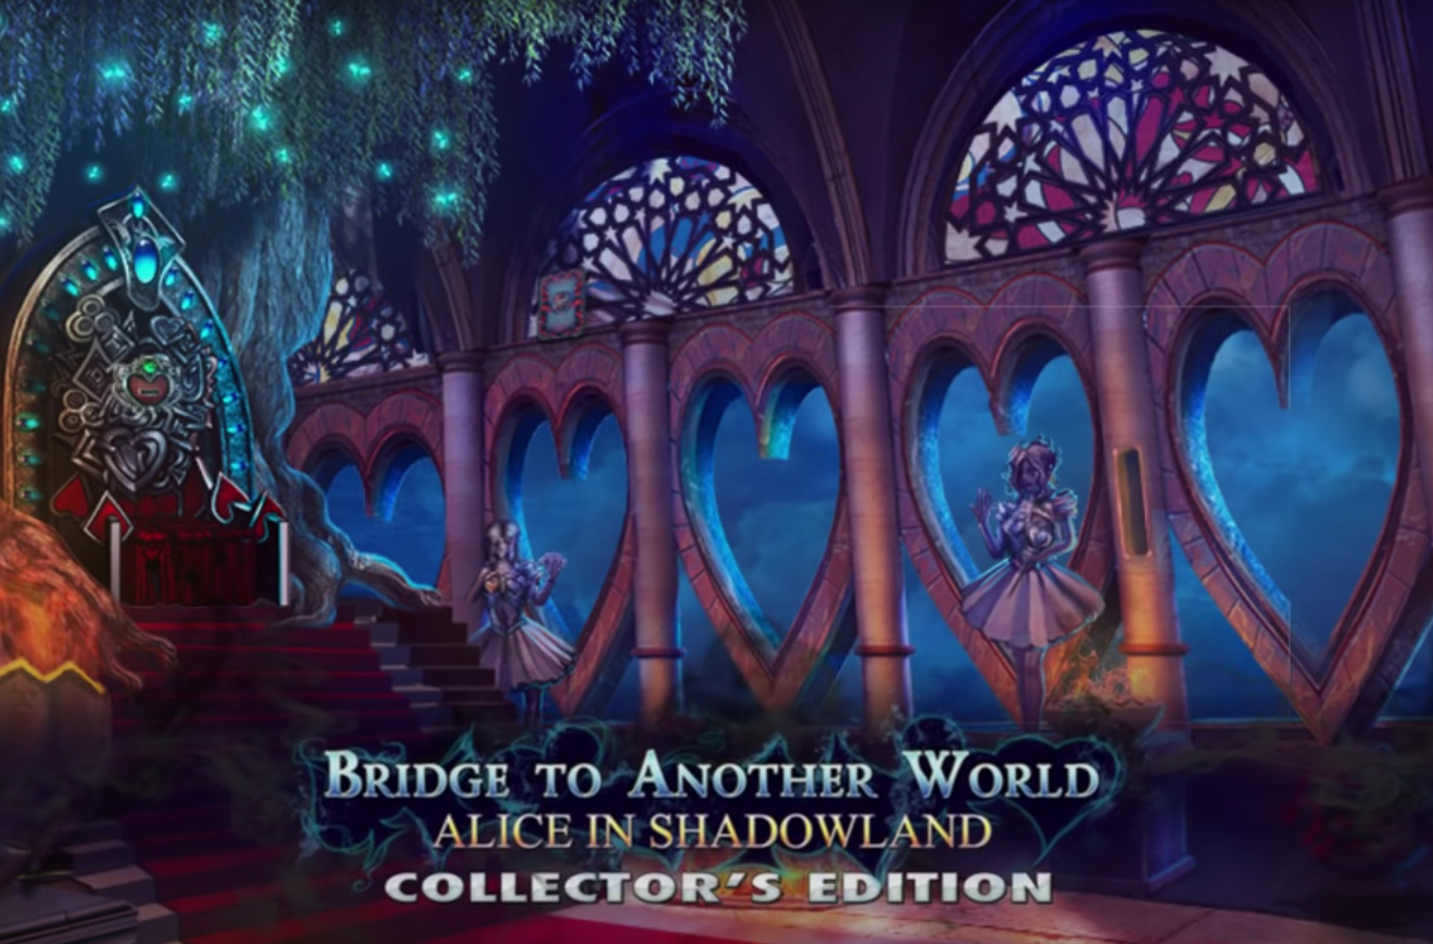 Bridge To Another World - Alice In Shadowland Collector's Edition 1.0 : Main Window